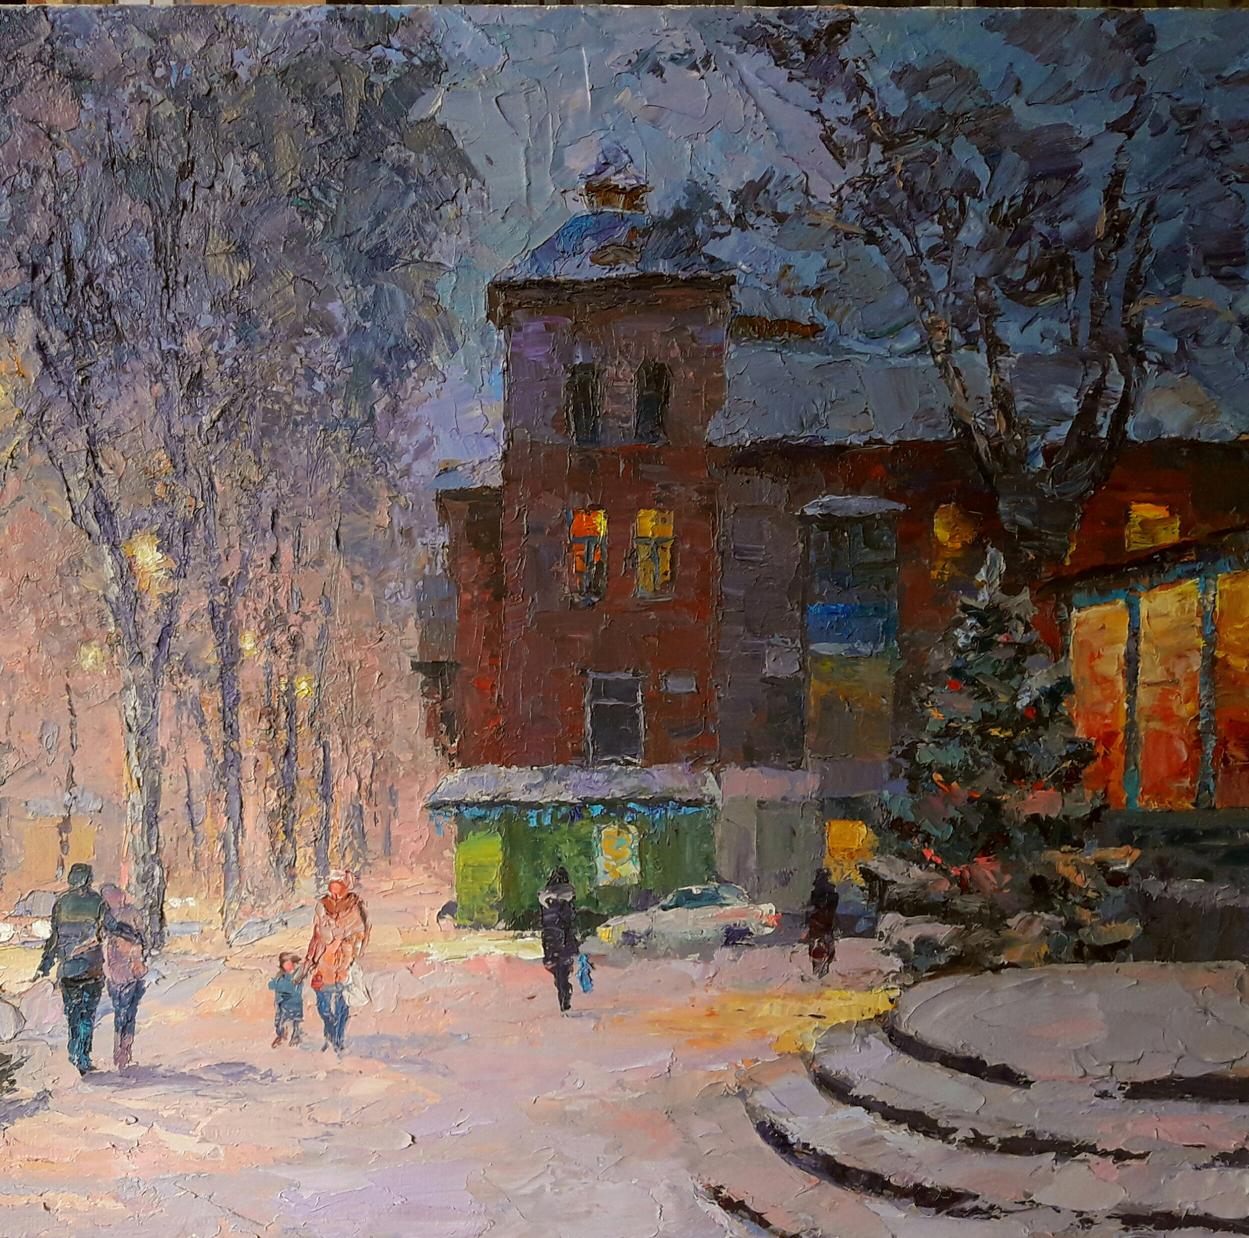 Oil painting On the eve of the New Year holidays Serdyuk Boris Petrovich